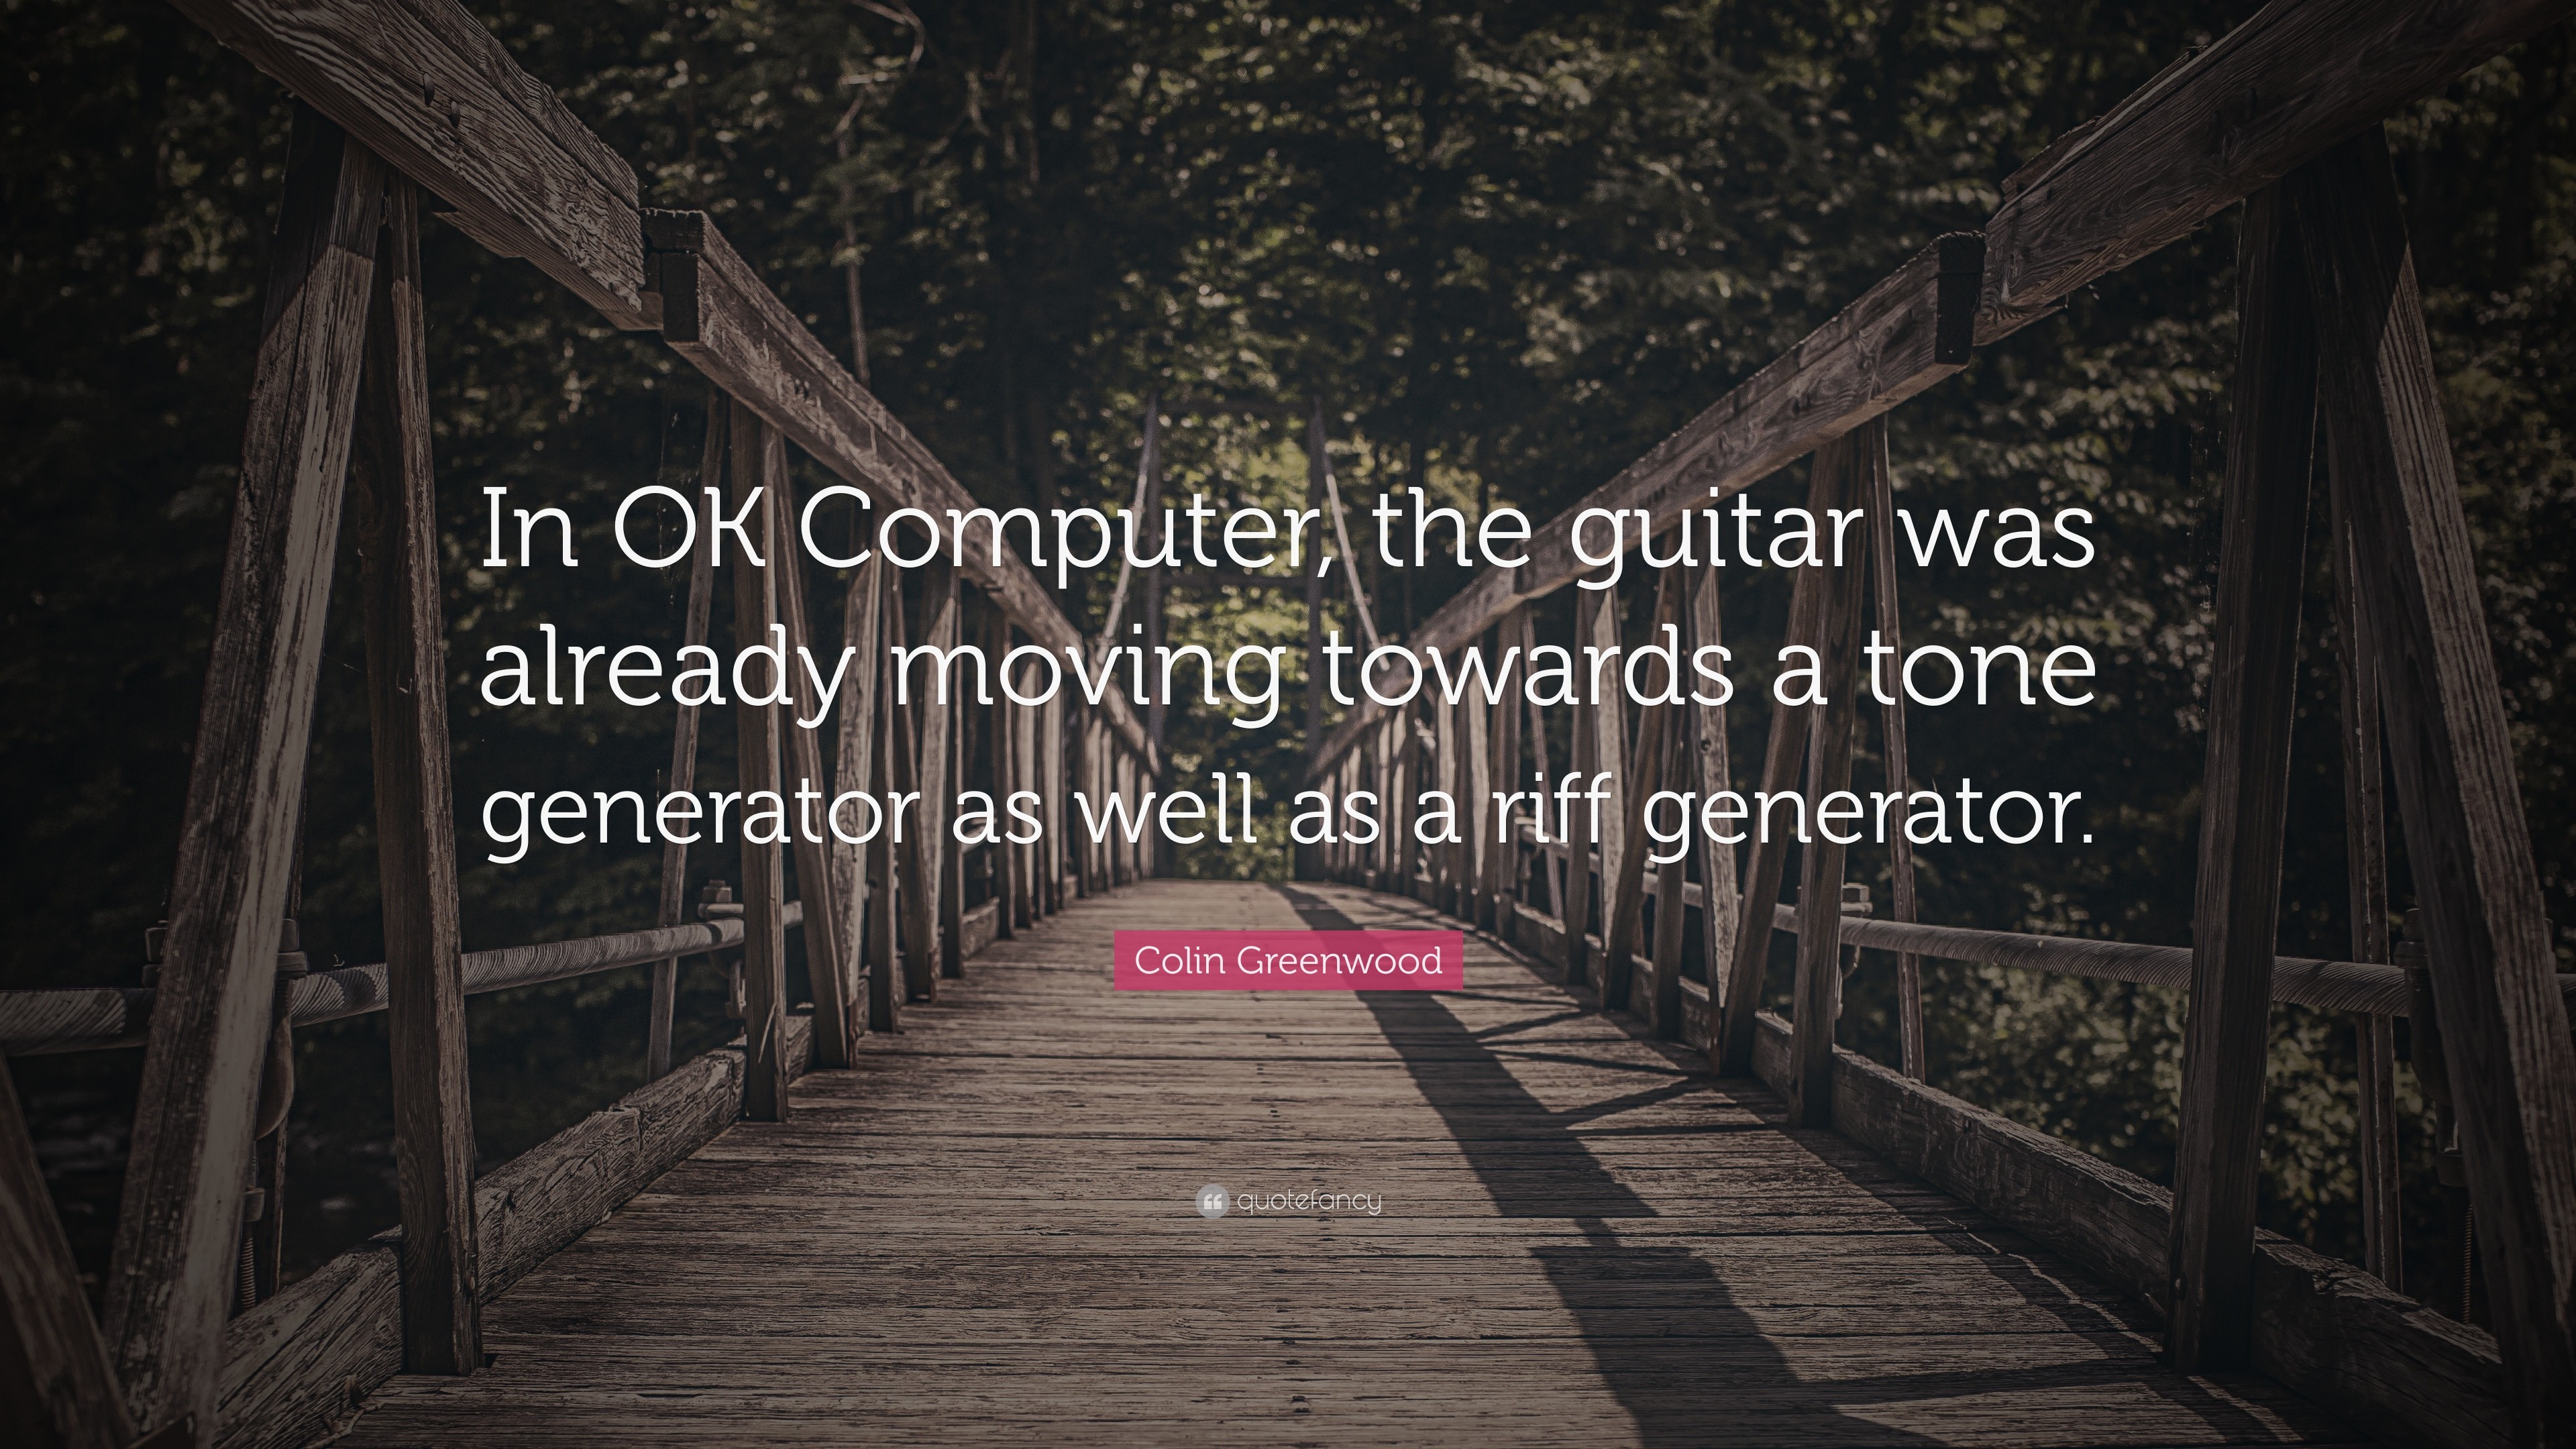 3840x2160 Colin Greenwood Quote: “In OK Computer, the guitar was already moving  towards a